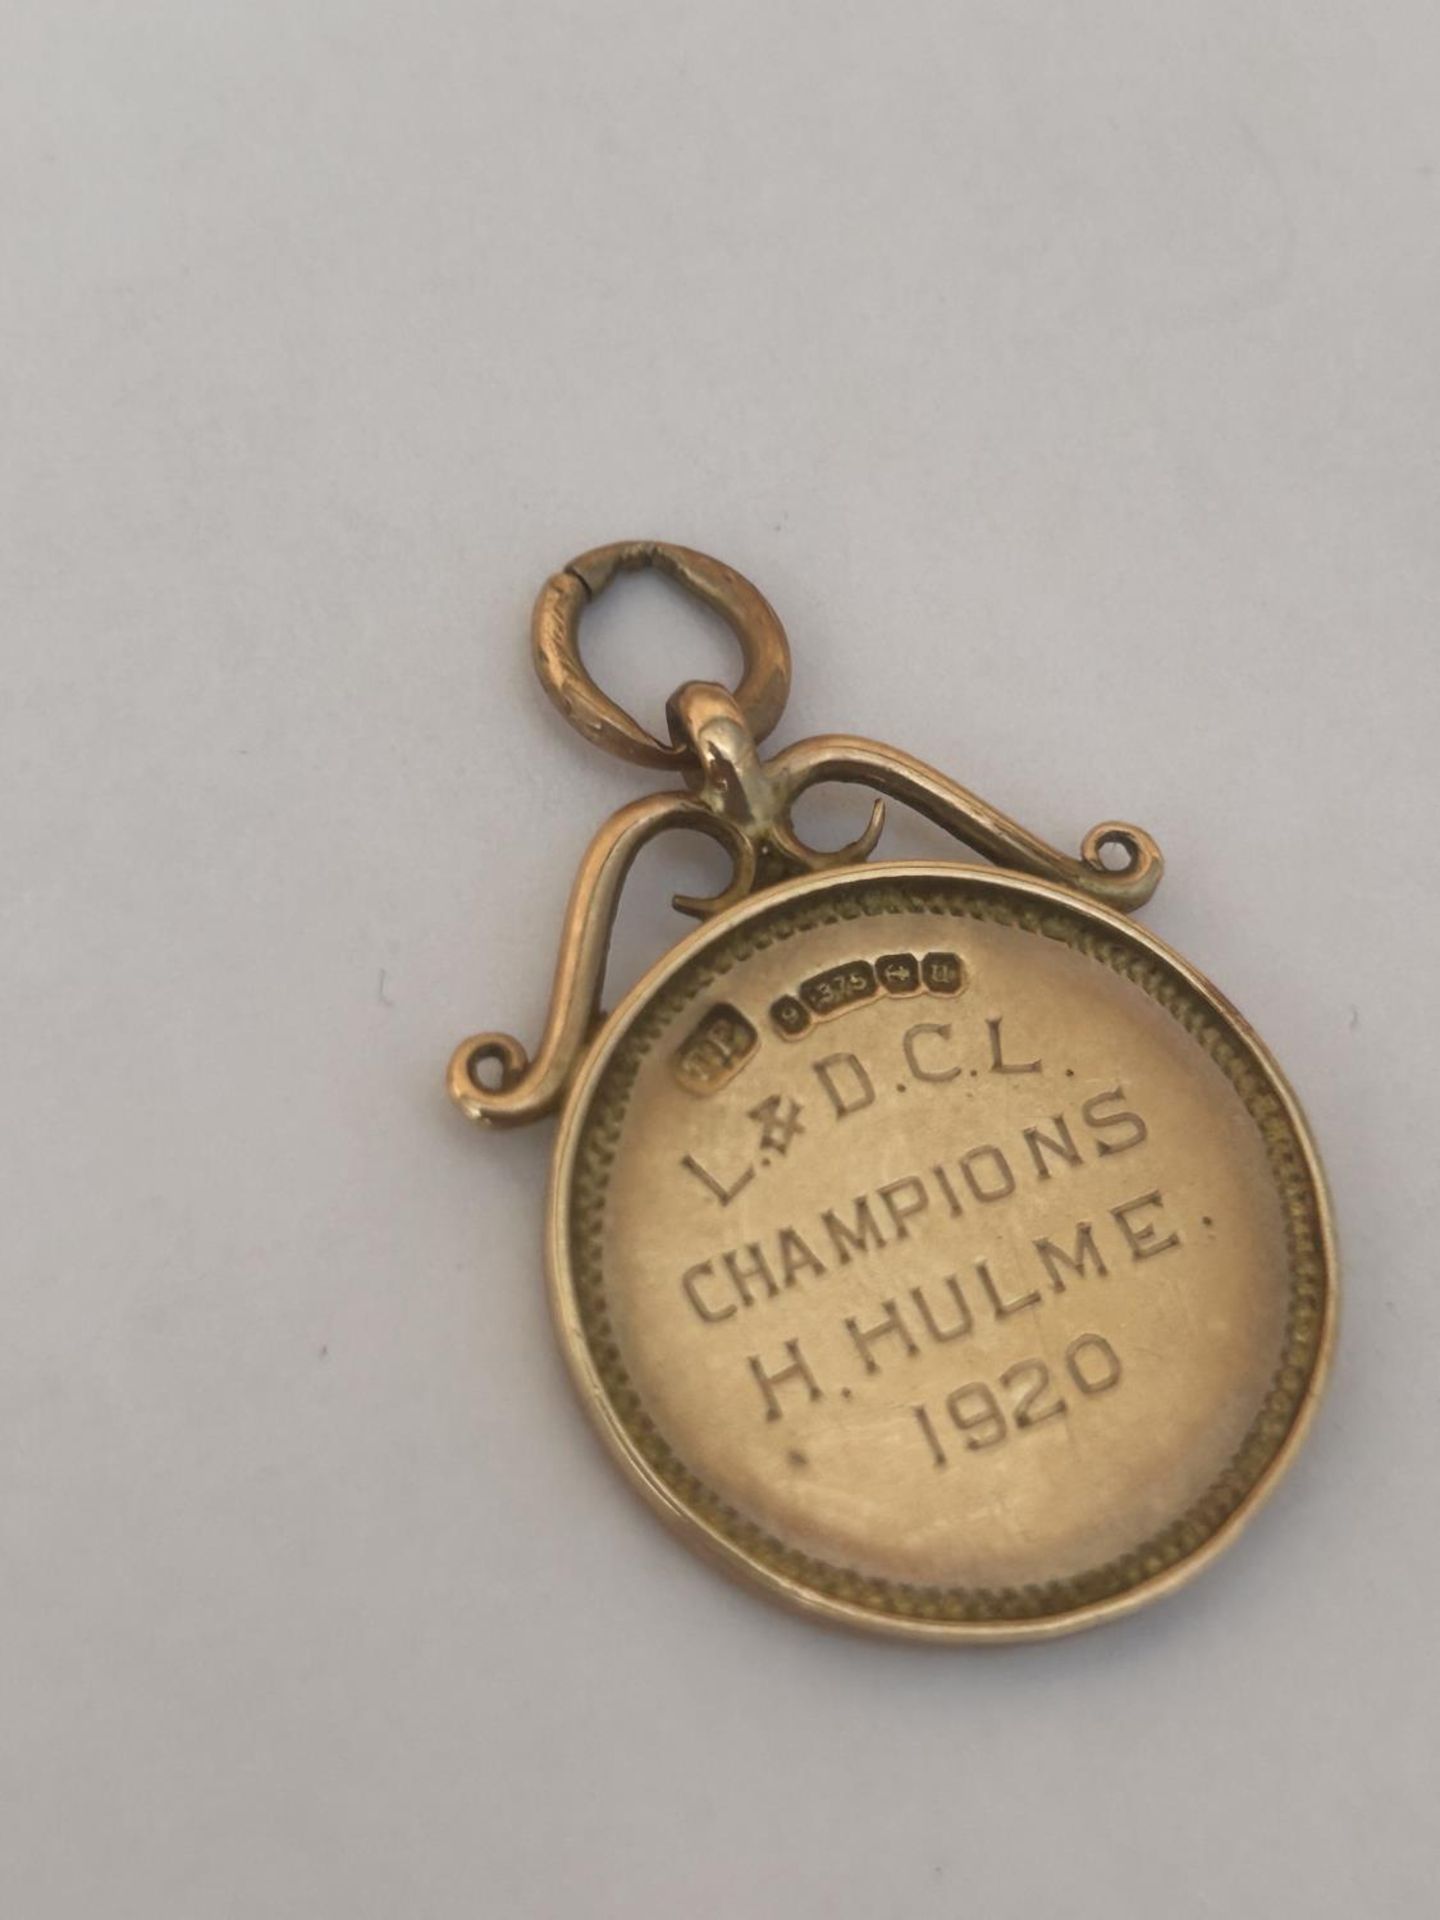 A HALLMARKED 9CT GOLD BIRMINGHAM SPORTING FOB INSCRIBED "L & D.C.L CHAMPIONS H.HULME 1920" MAKERS - Image 4 of 4